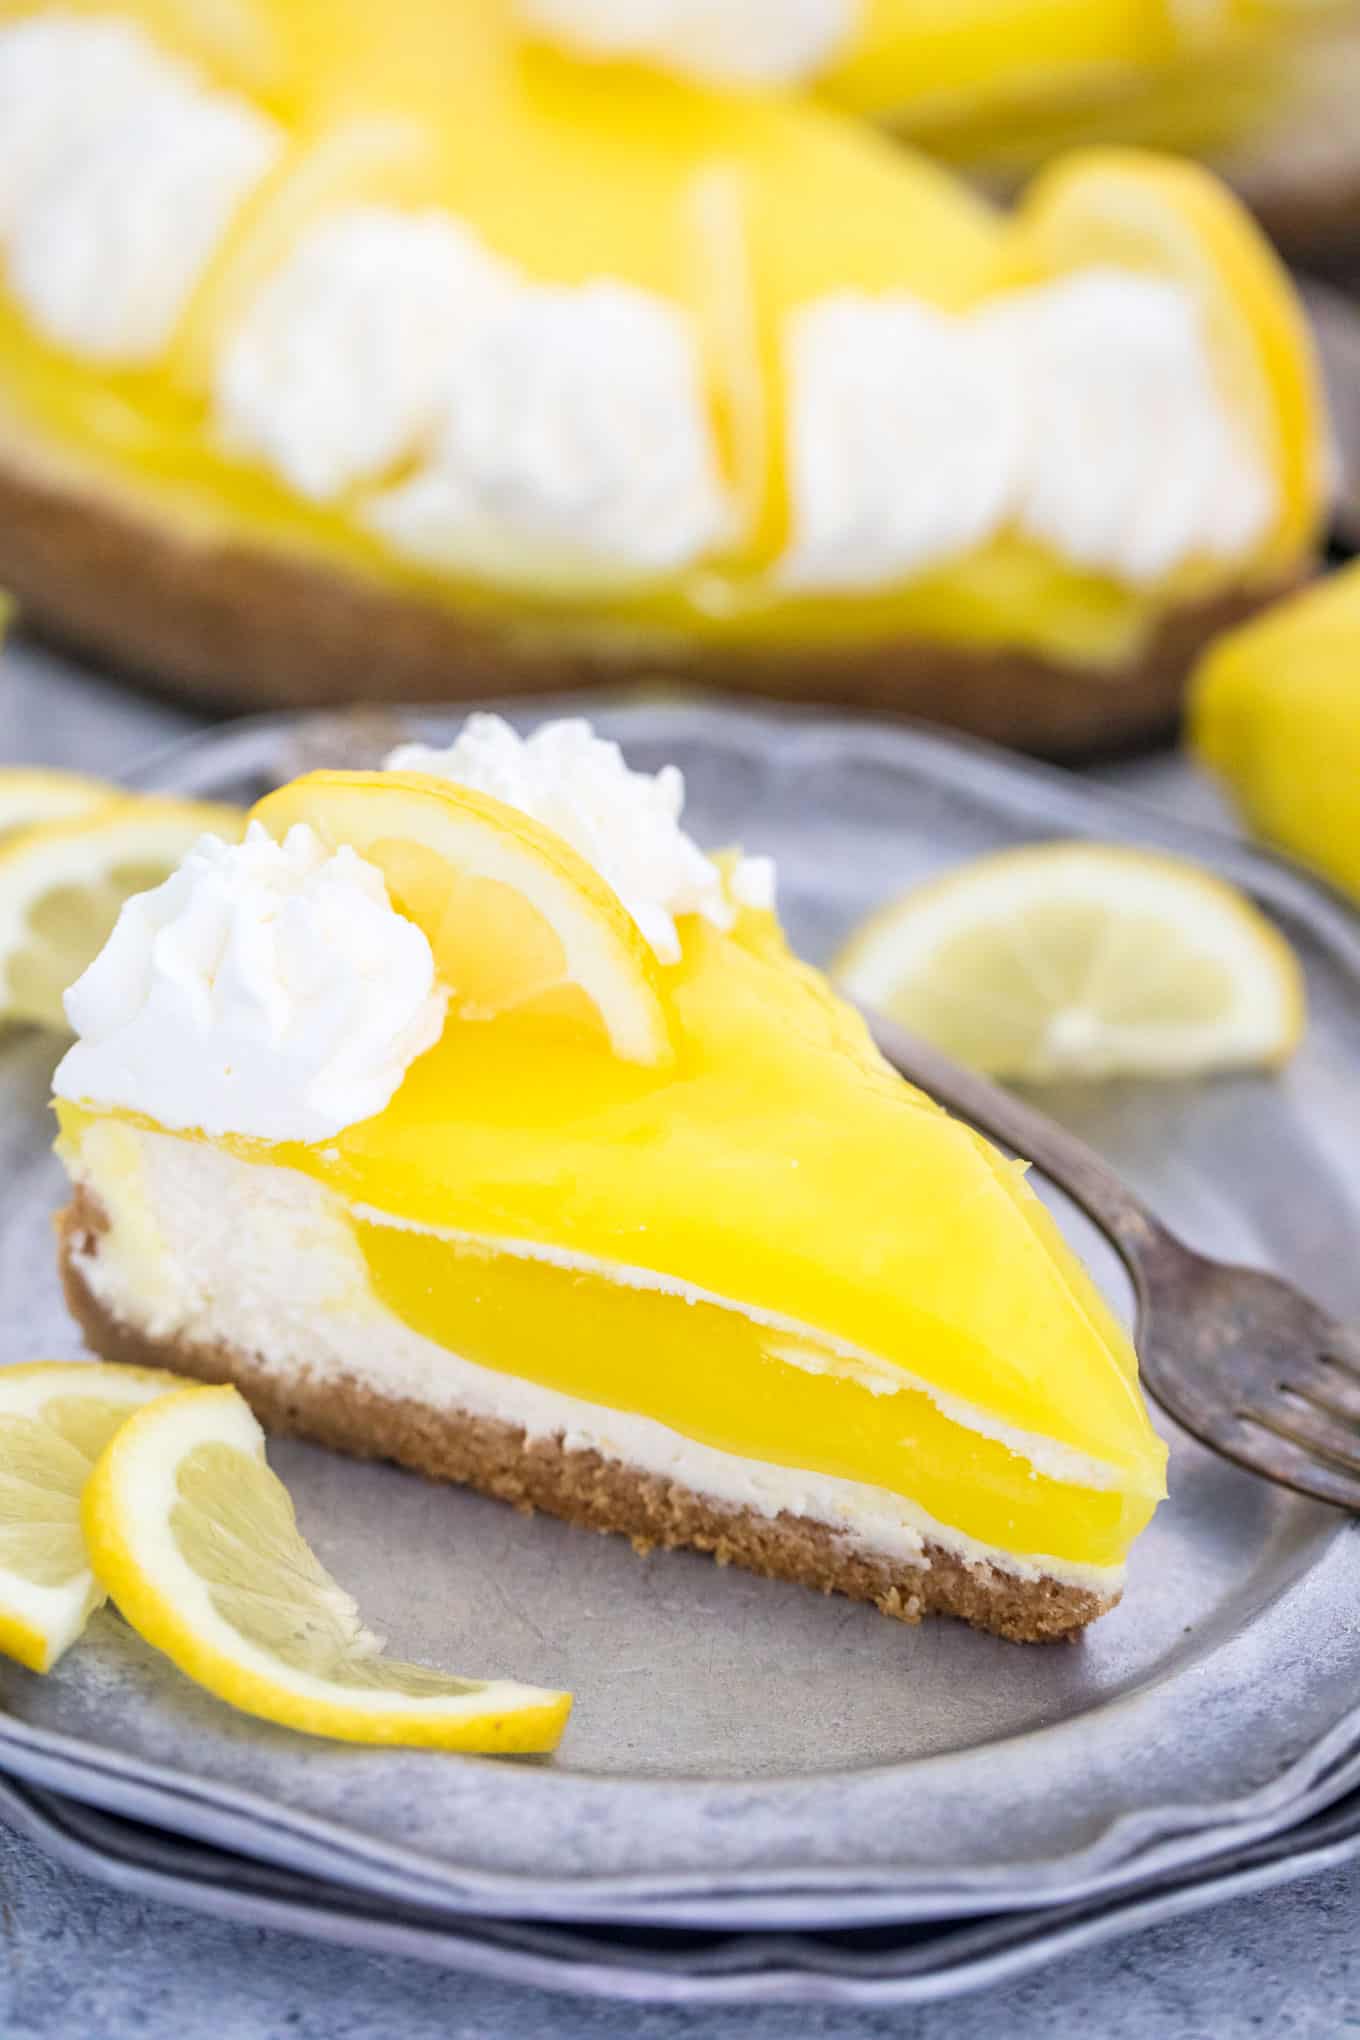 Piece of lemon cheesecake on a plate with a fork and lemon slices